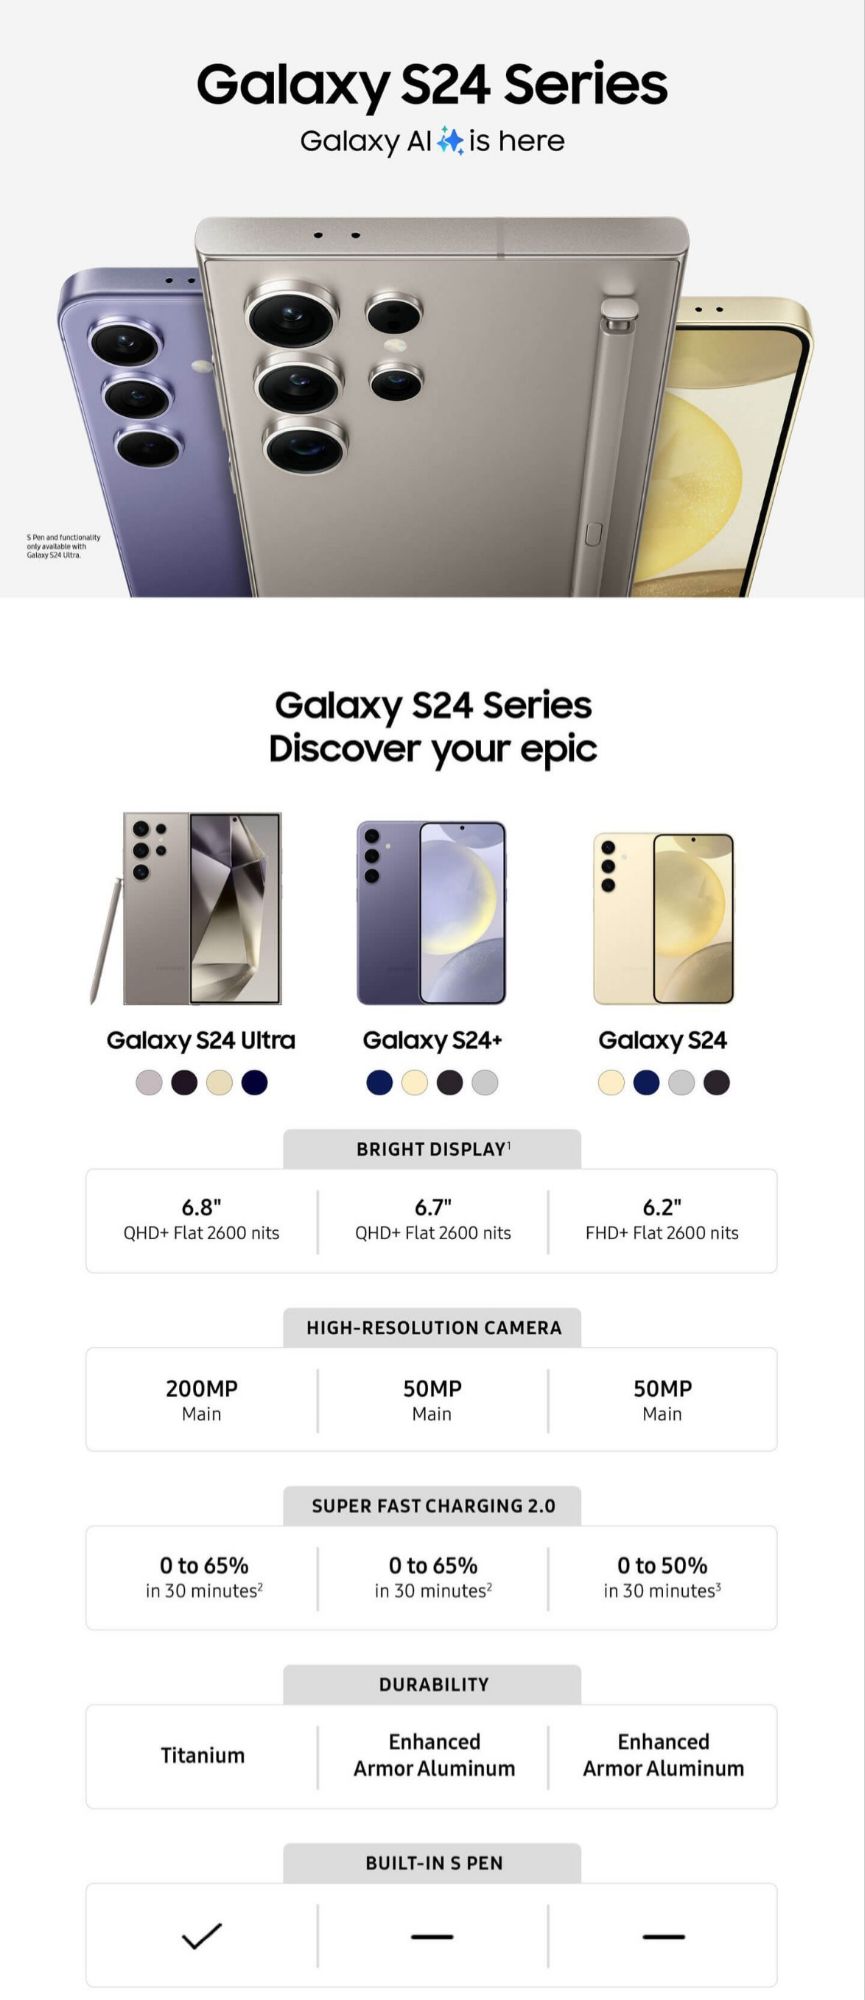 Samsung Galaxy S24 series promotional materials